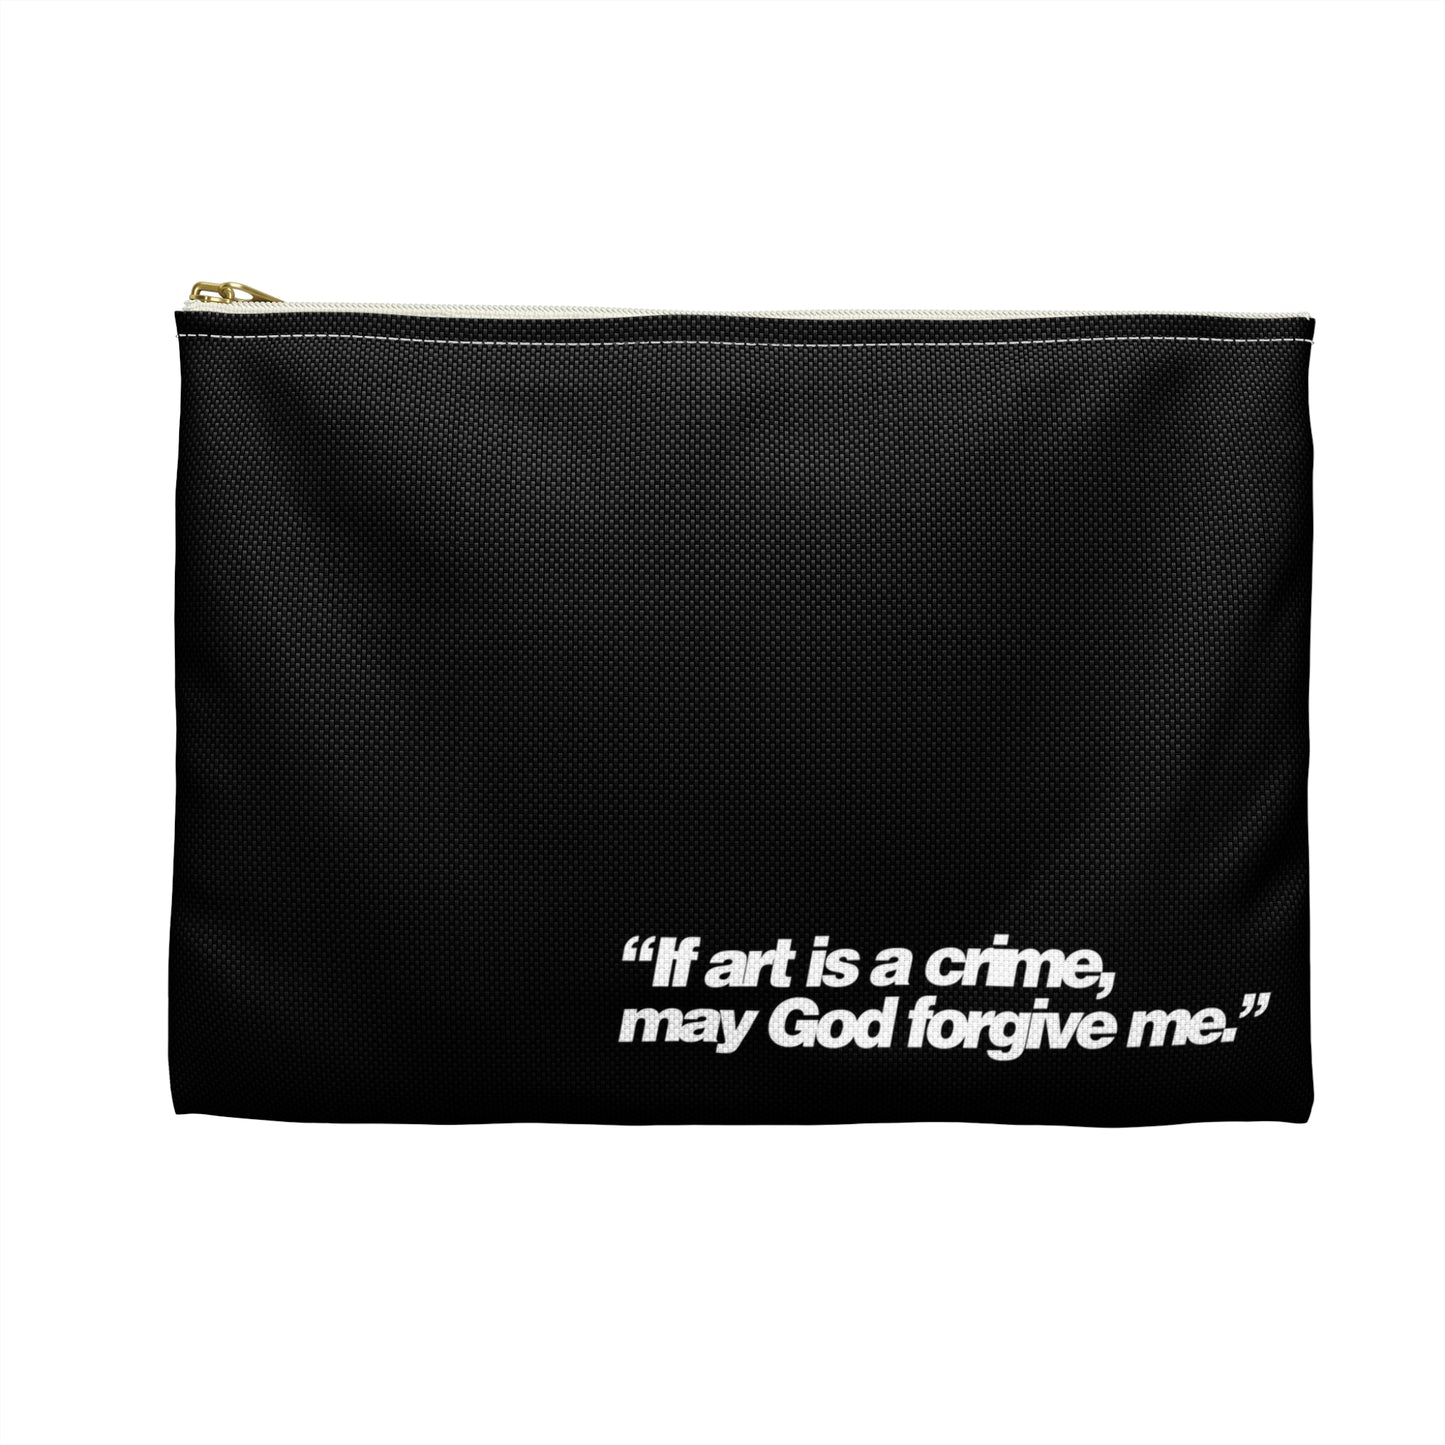 The back of a black, fabric, pencil pouch, on the bottom it reads "If art is a crime, may God forgive me." In white font